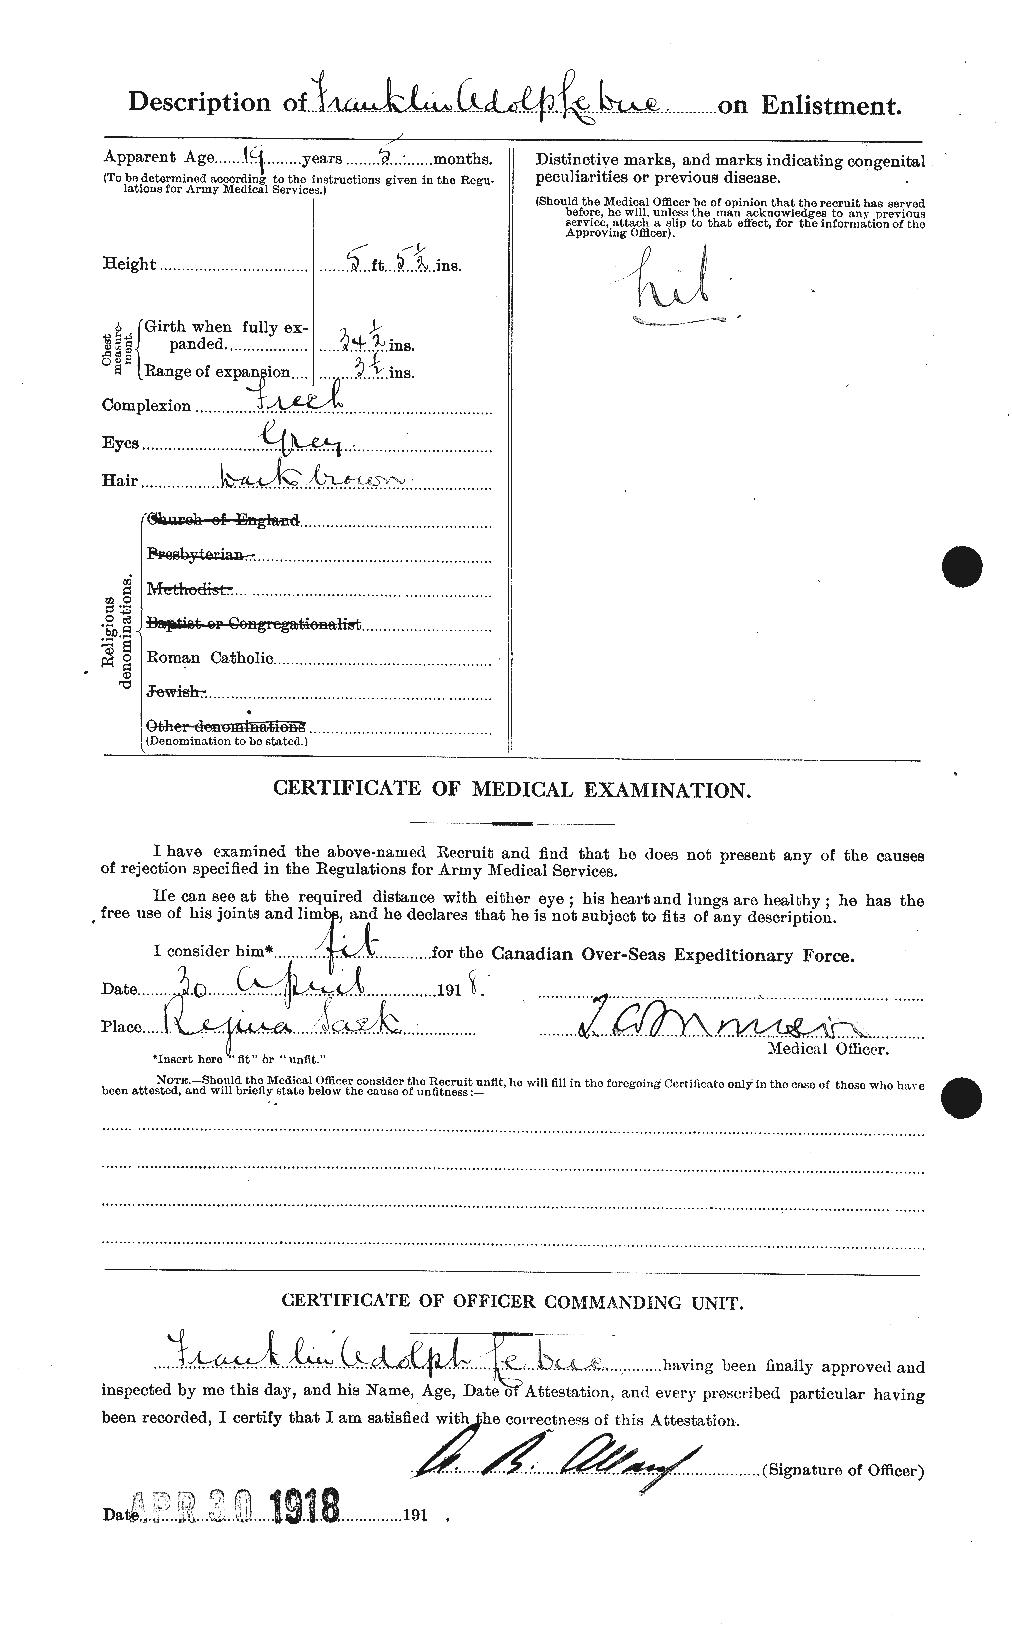 Personnel Records of the First World War - CEF 456527b